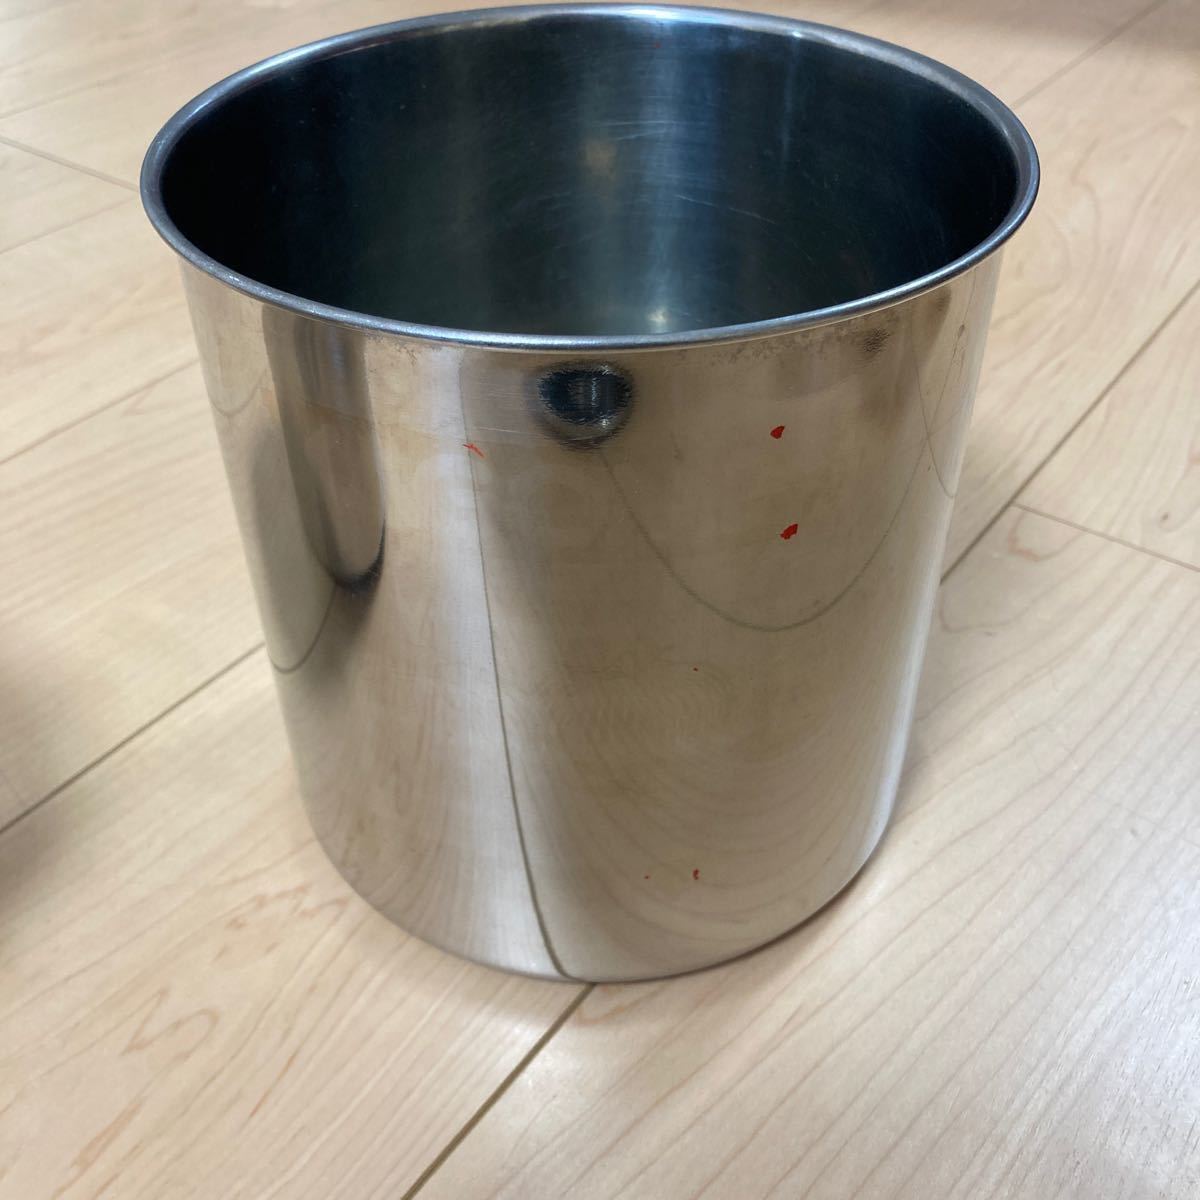 [ secondhand goods ] round deep type kitchen pot / stainless steel pot / stockpot / cookware / business use / cover attaching / 6 piece set 